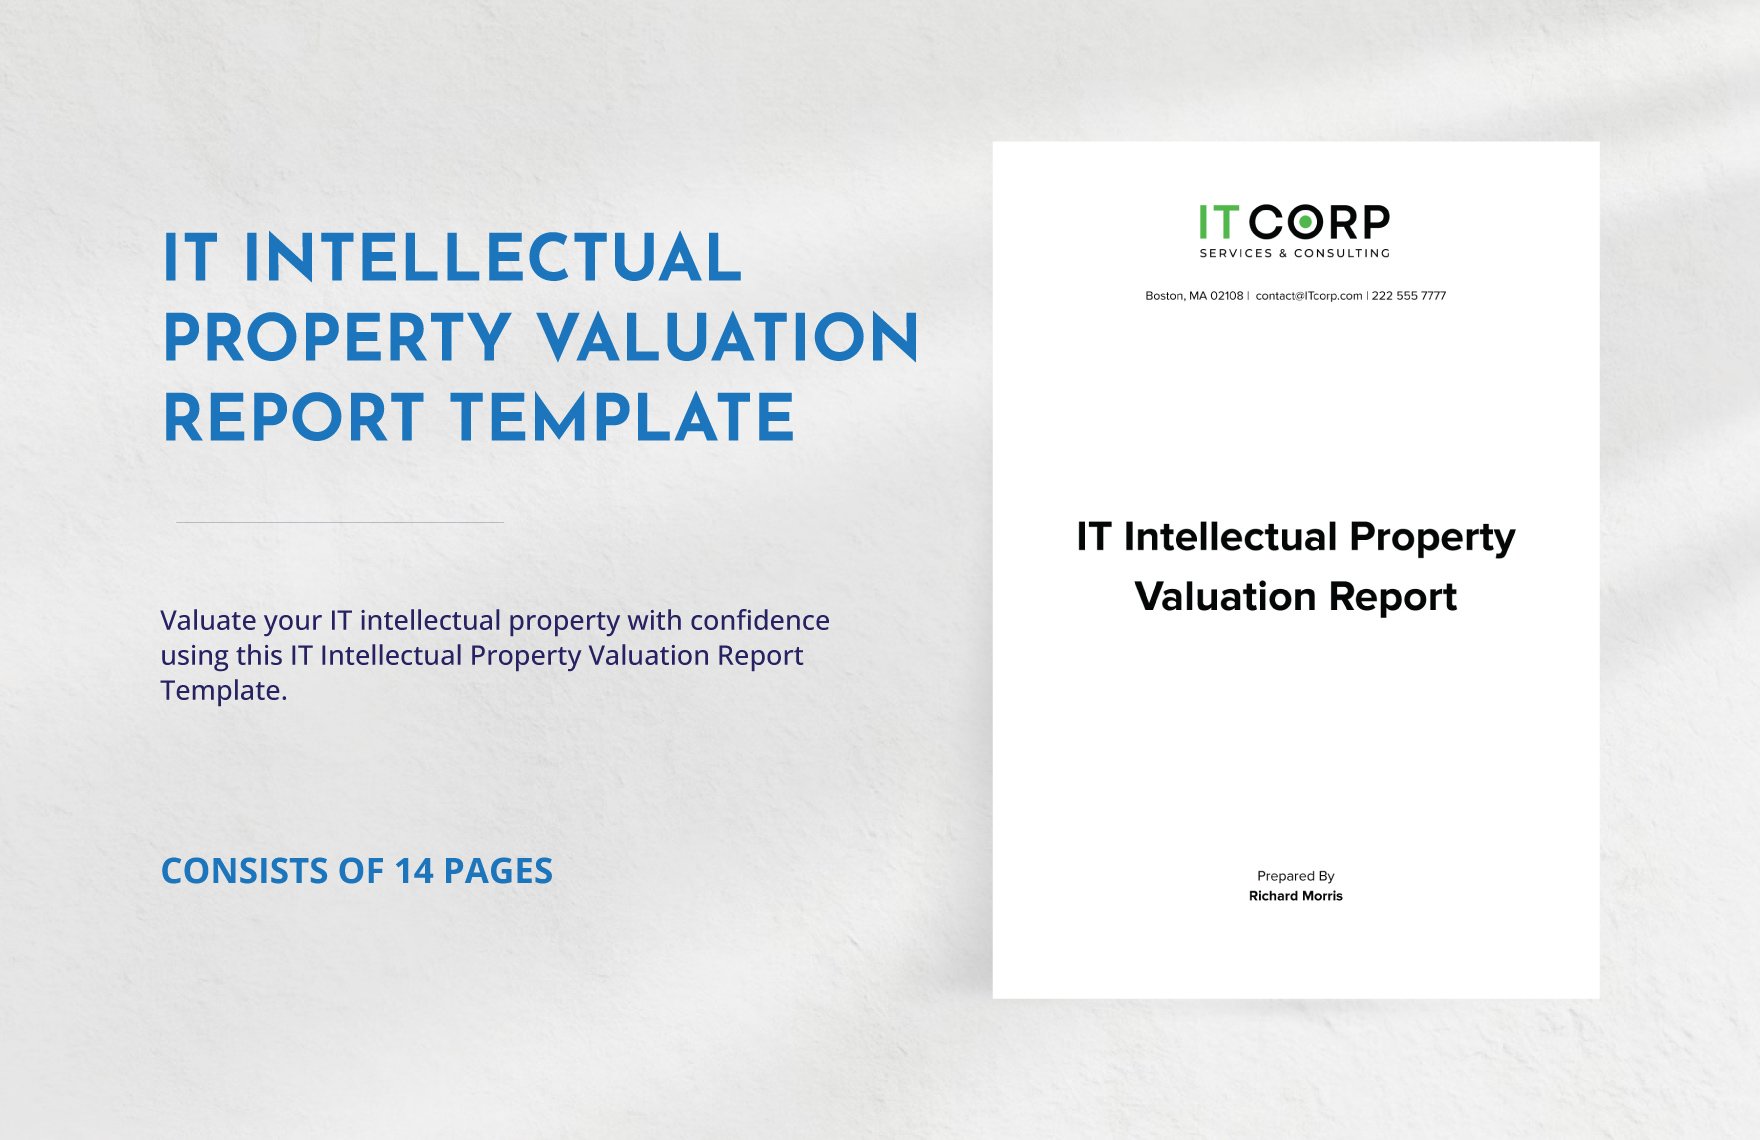 IT Intellectual Property Valuation Report Template